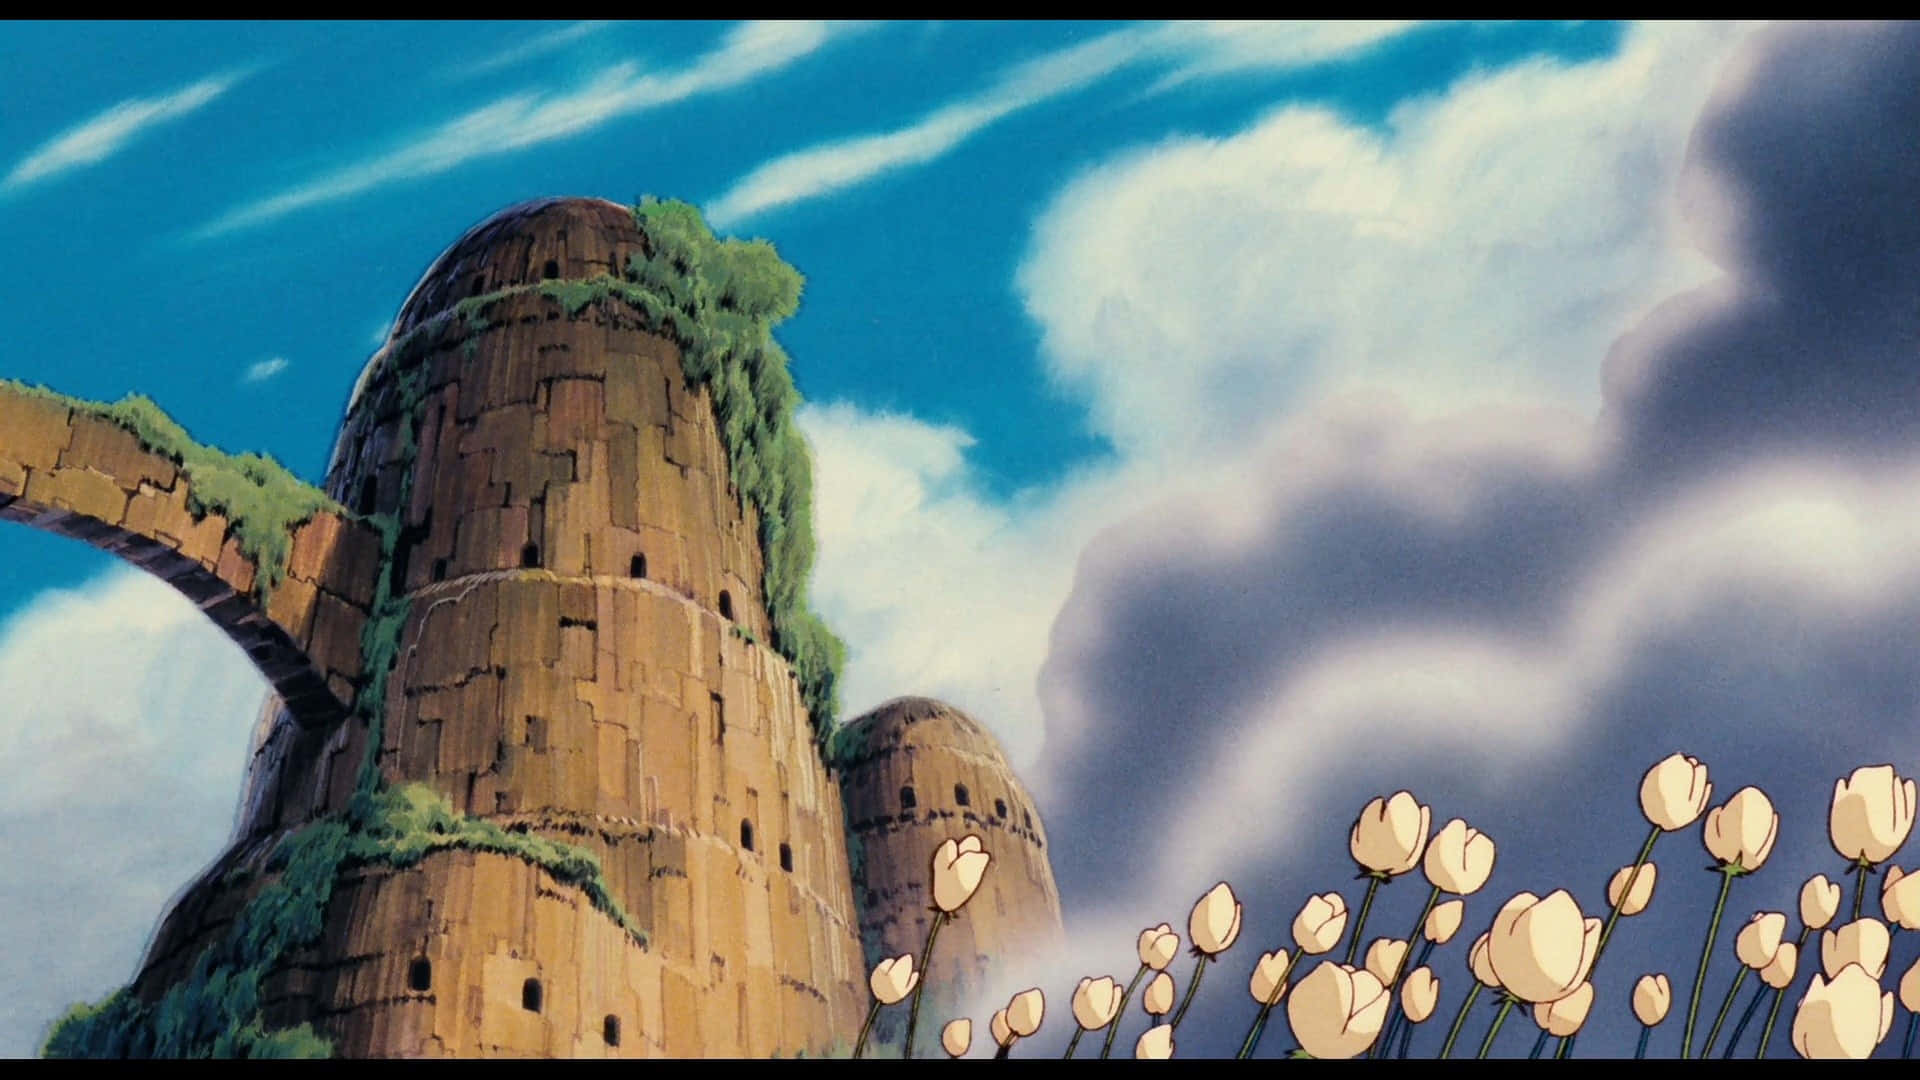 The majestic Laputa castle stands in the sky, its mysterious architecture captivating the viewer. Wallpaper